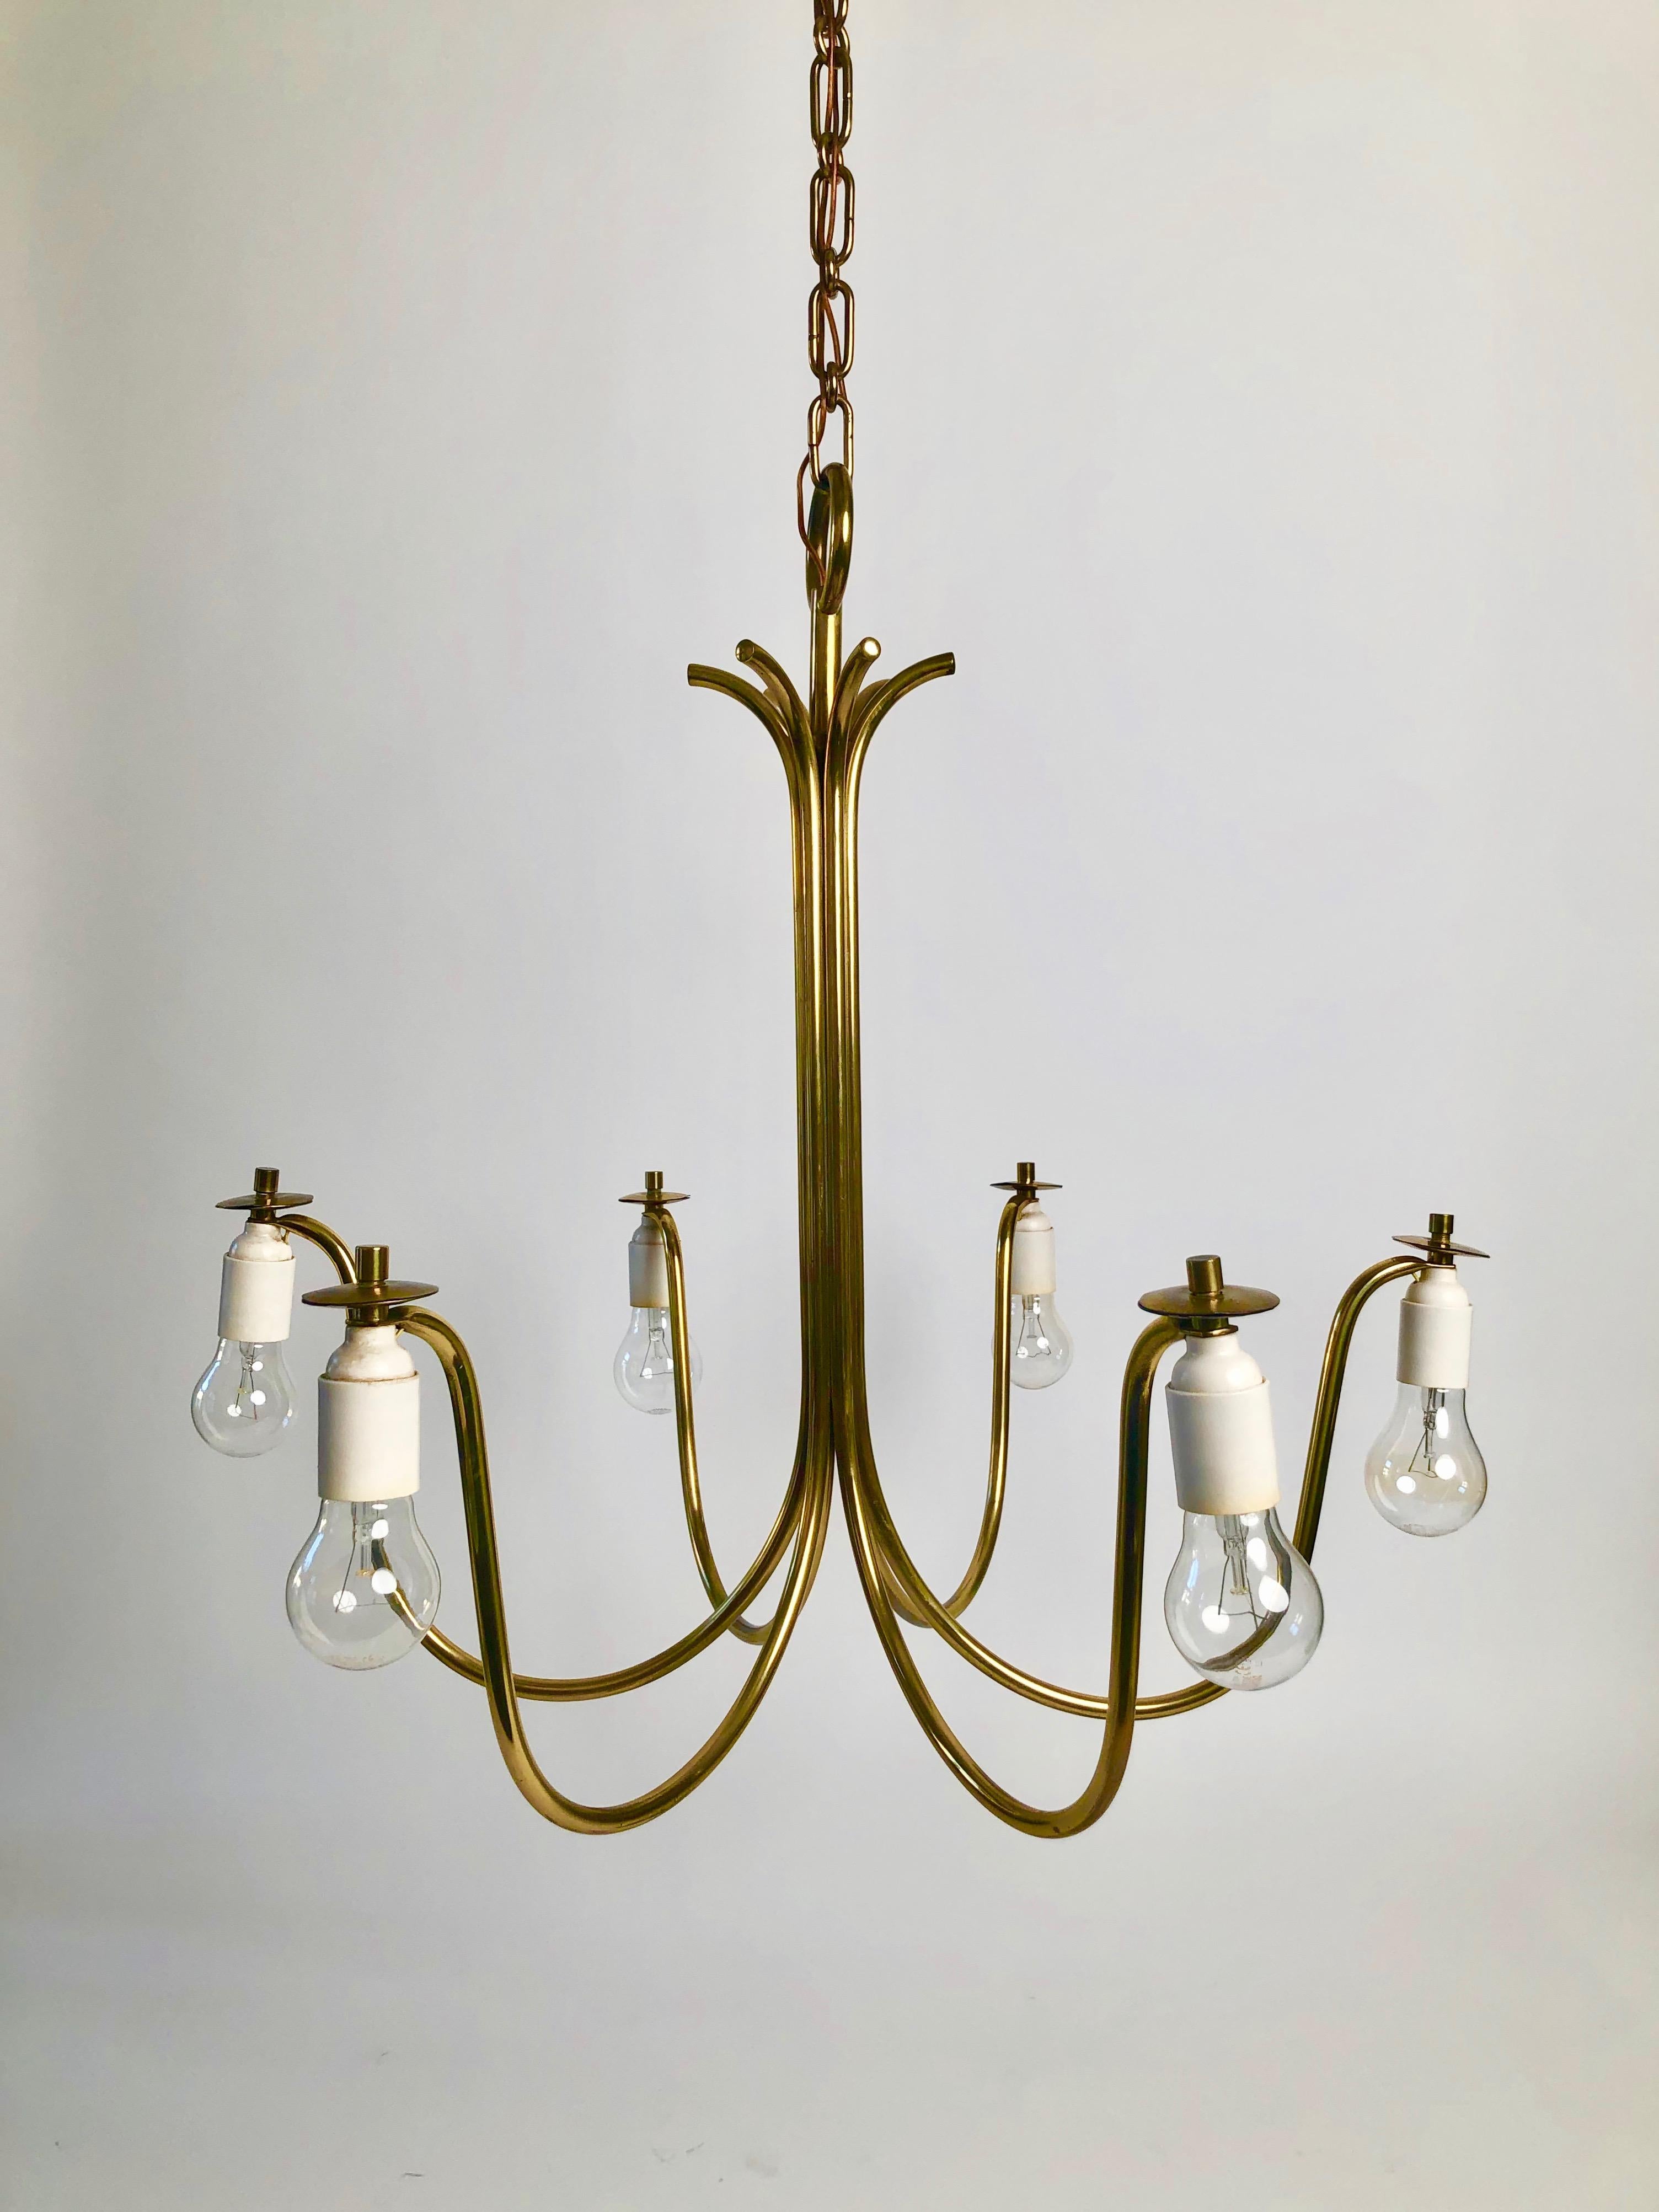 Mid-20th Century Large Chandelier with Six Shades in Brass from Josef Frank , Austria For Sale